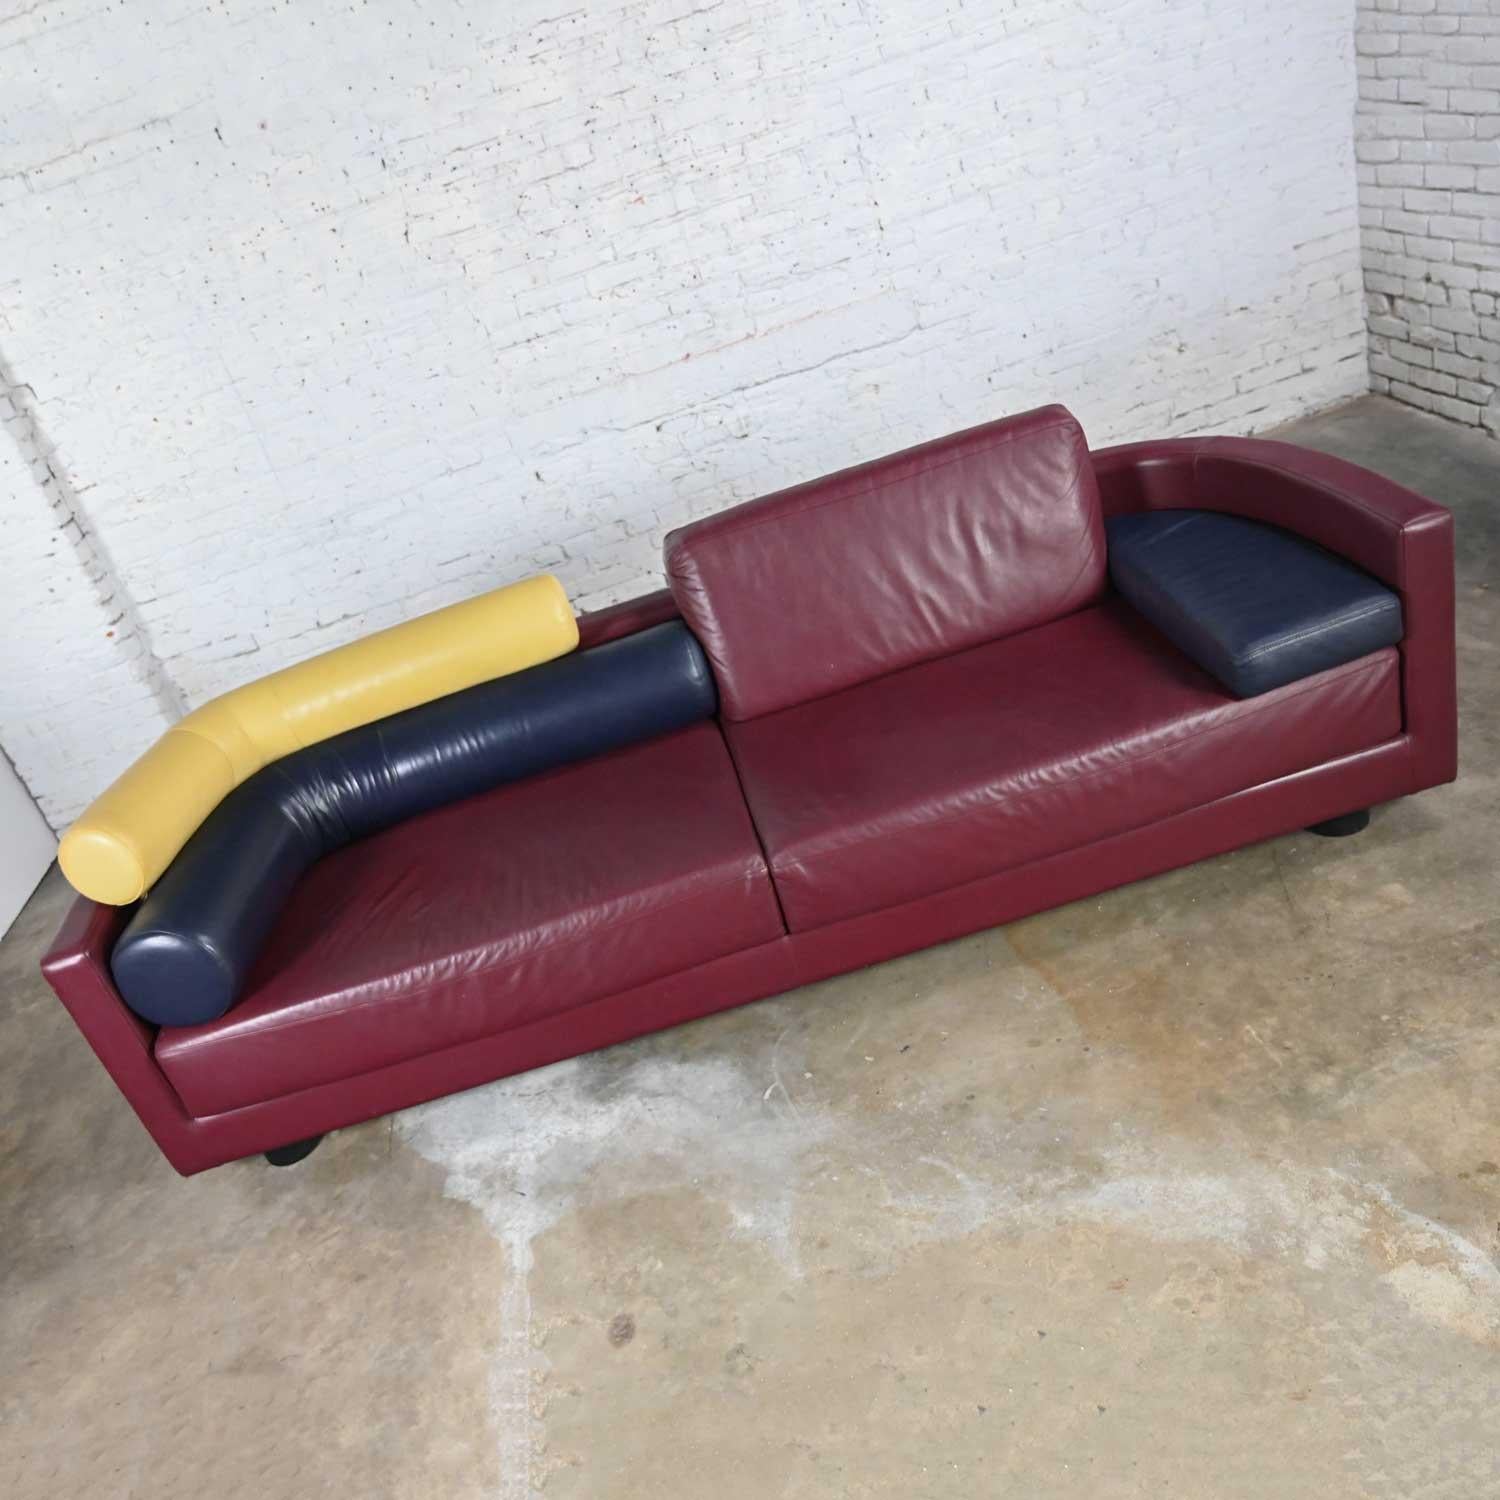 Spectacular postmodern Italian Molto + Di maroon leather sofa by Tittina Ammannati & Vitelli Giampiero for I4 Mariani. Beautiful condition, keeping in mind that this is vintage and not new so will have signs of use and wear. We have touched up a